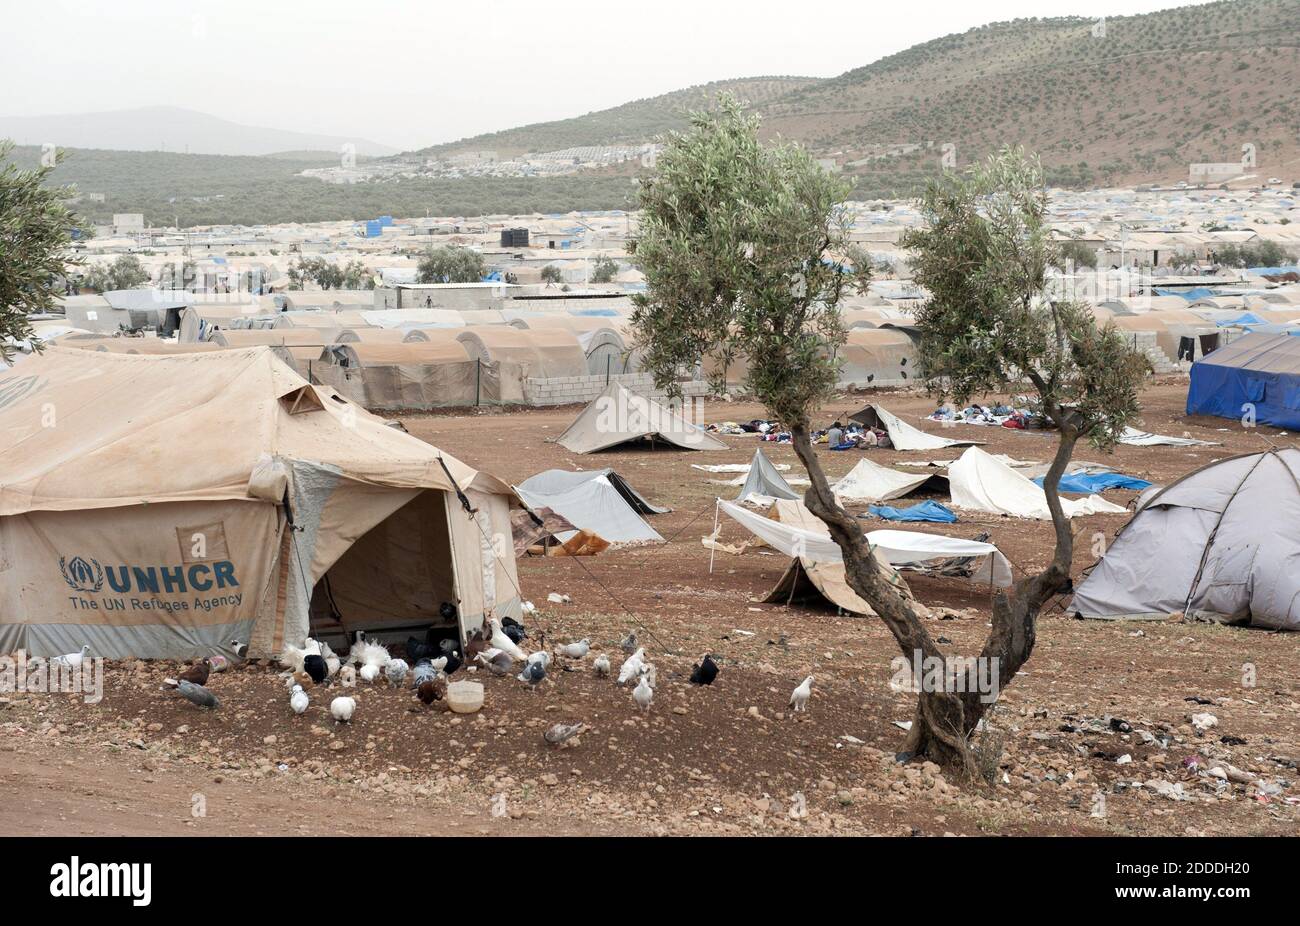 NO FILM, NO VIDEO, NO TV, NO DOCUMENTARY - At the 'Hands of Cooperation' camp, or Alta'awan, for Syrians fleeing the barrel-bombing and artillery attacks on their towns and villages, some 4,000 people live in squalid conditions. It is the world's biggest humanitarian crisis, but no one in the international community has oversight or responsibility. By some counts, half the population of Syria has fled its homes to escape violence. But thereês little attention to the tragedy. Bab Al Awa, Syria-Turkey border, May 2014. Photo by Andree Kaiser/MCT/ABACAPRESS.COM Stock Photo